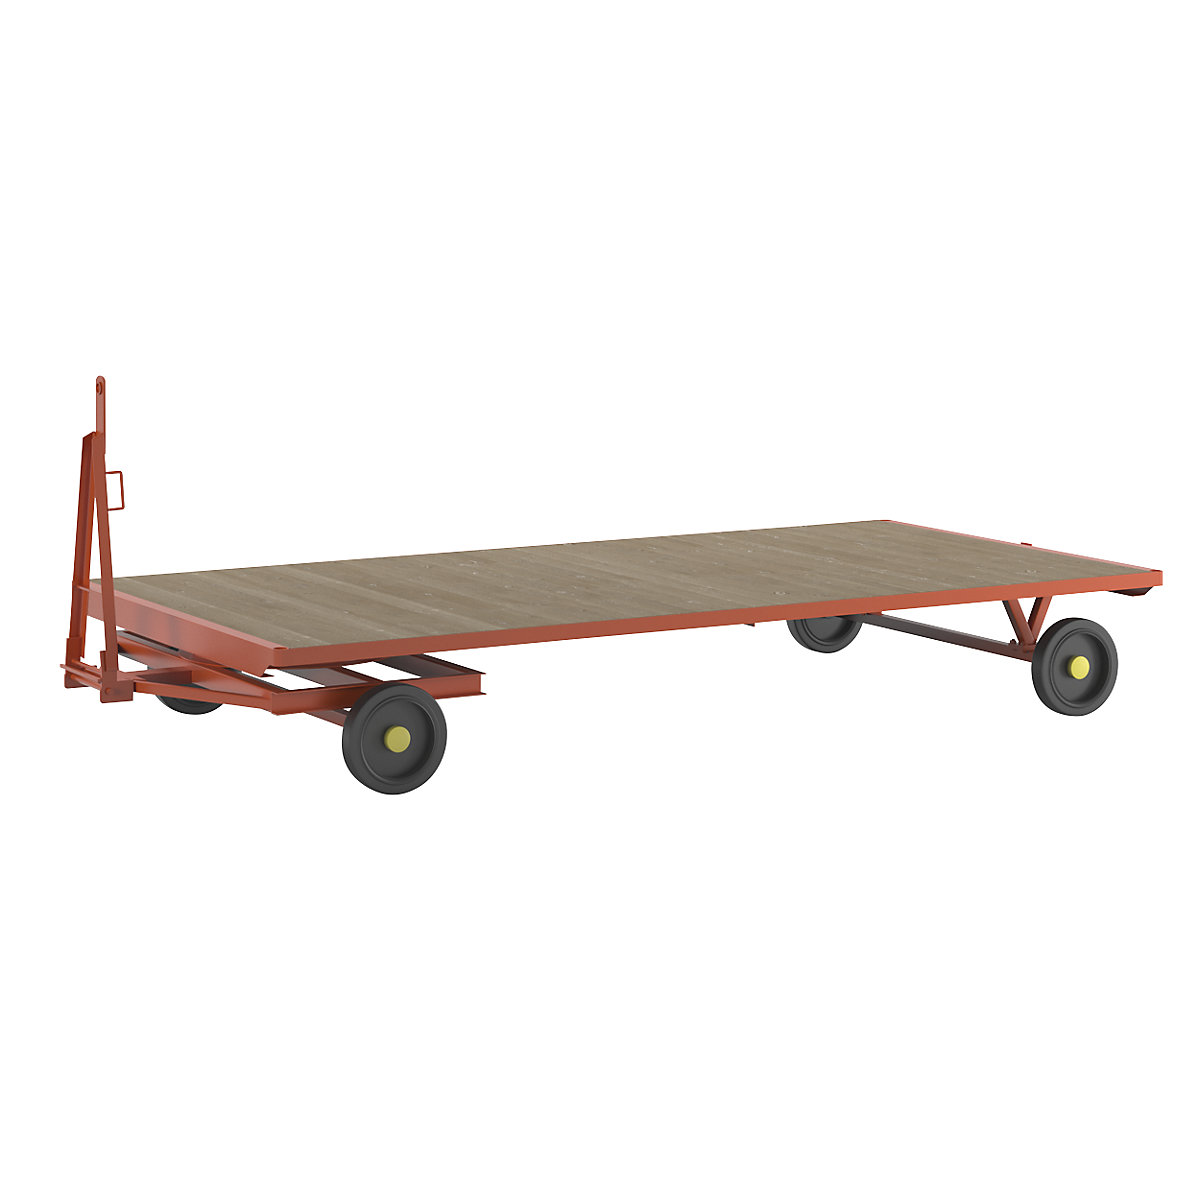 Trailer, 2-wheel turntable steering, max. load 3 t, platform 4.0 x 2.0 m, solid rubber tyres-16